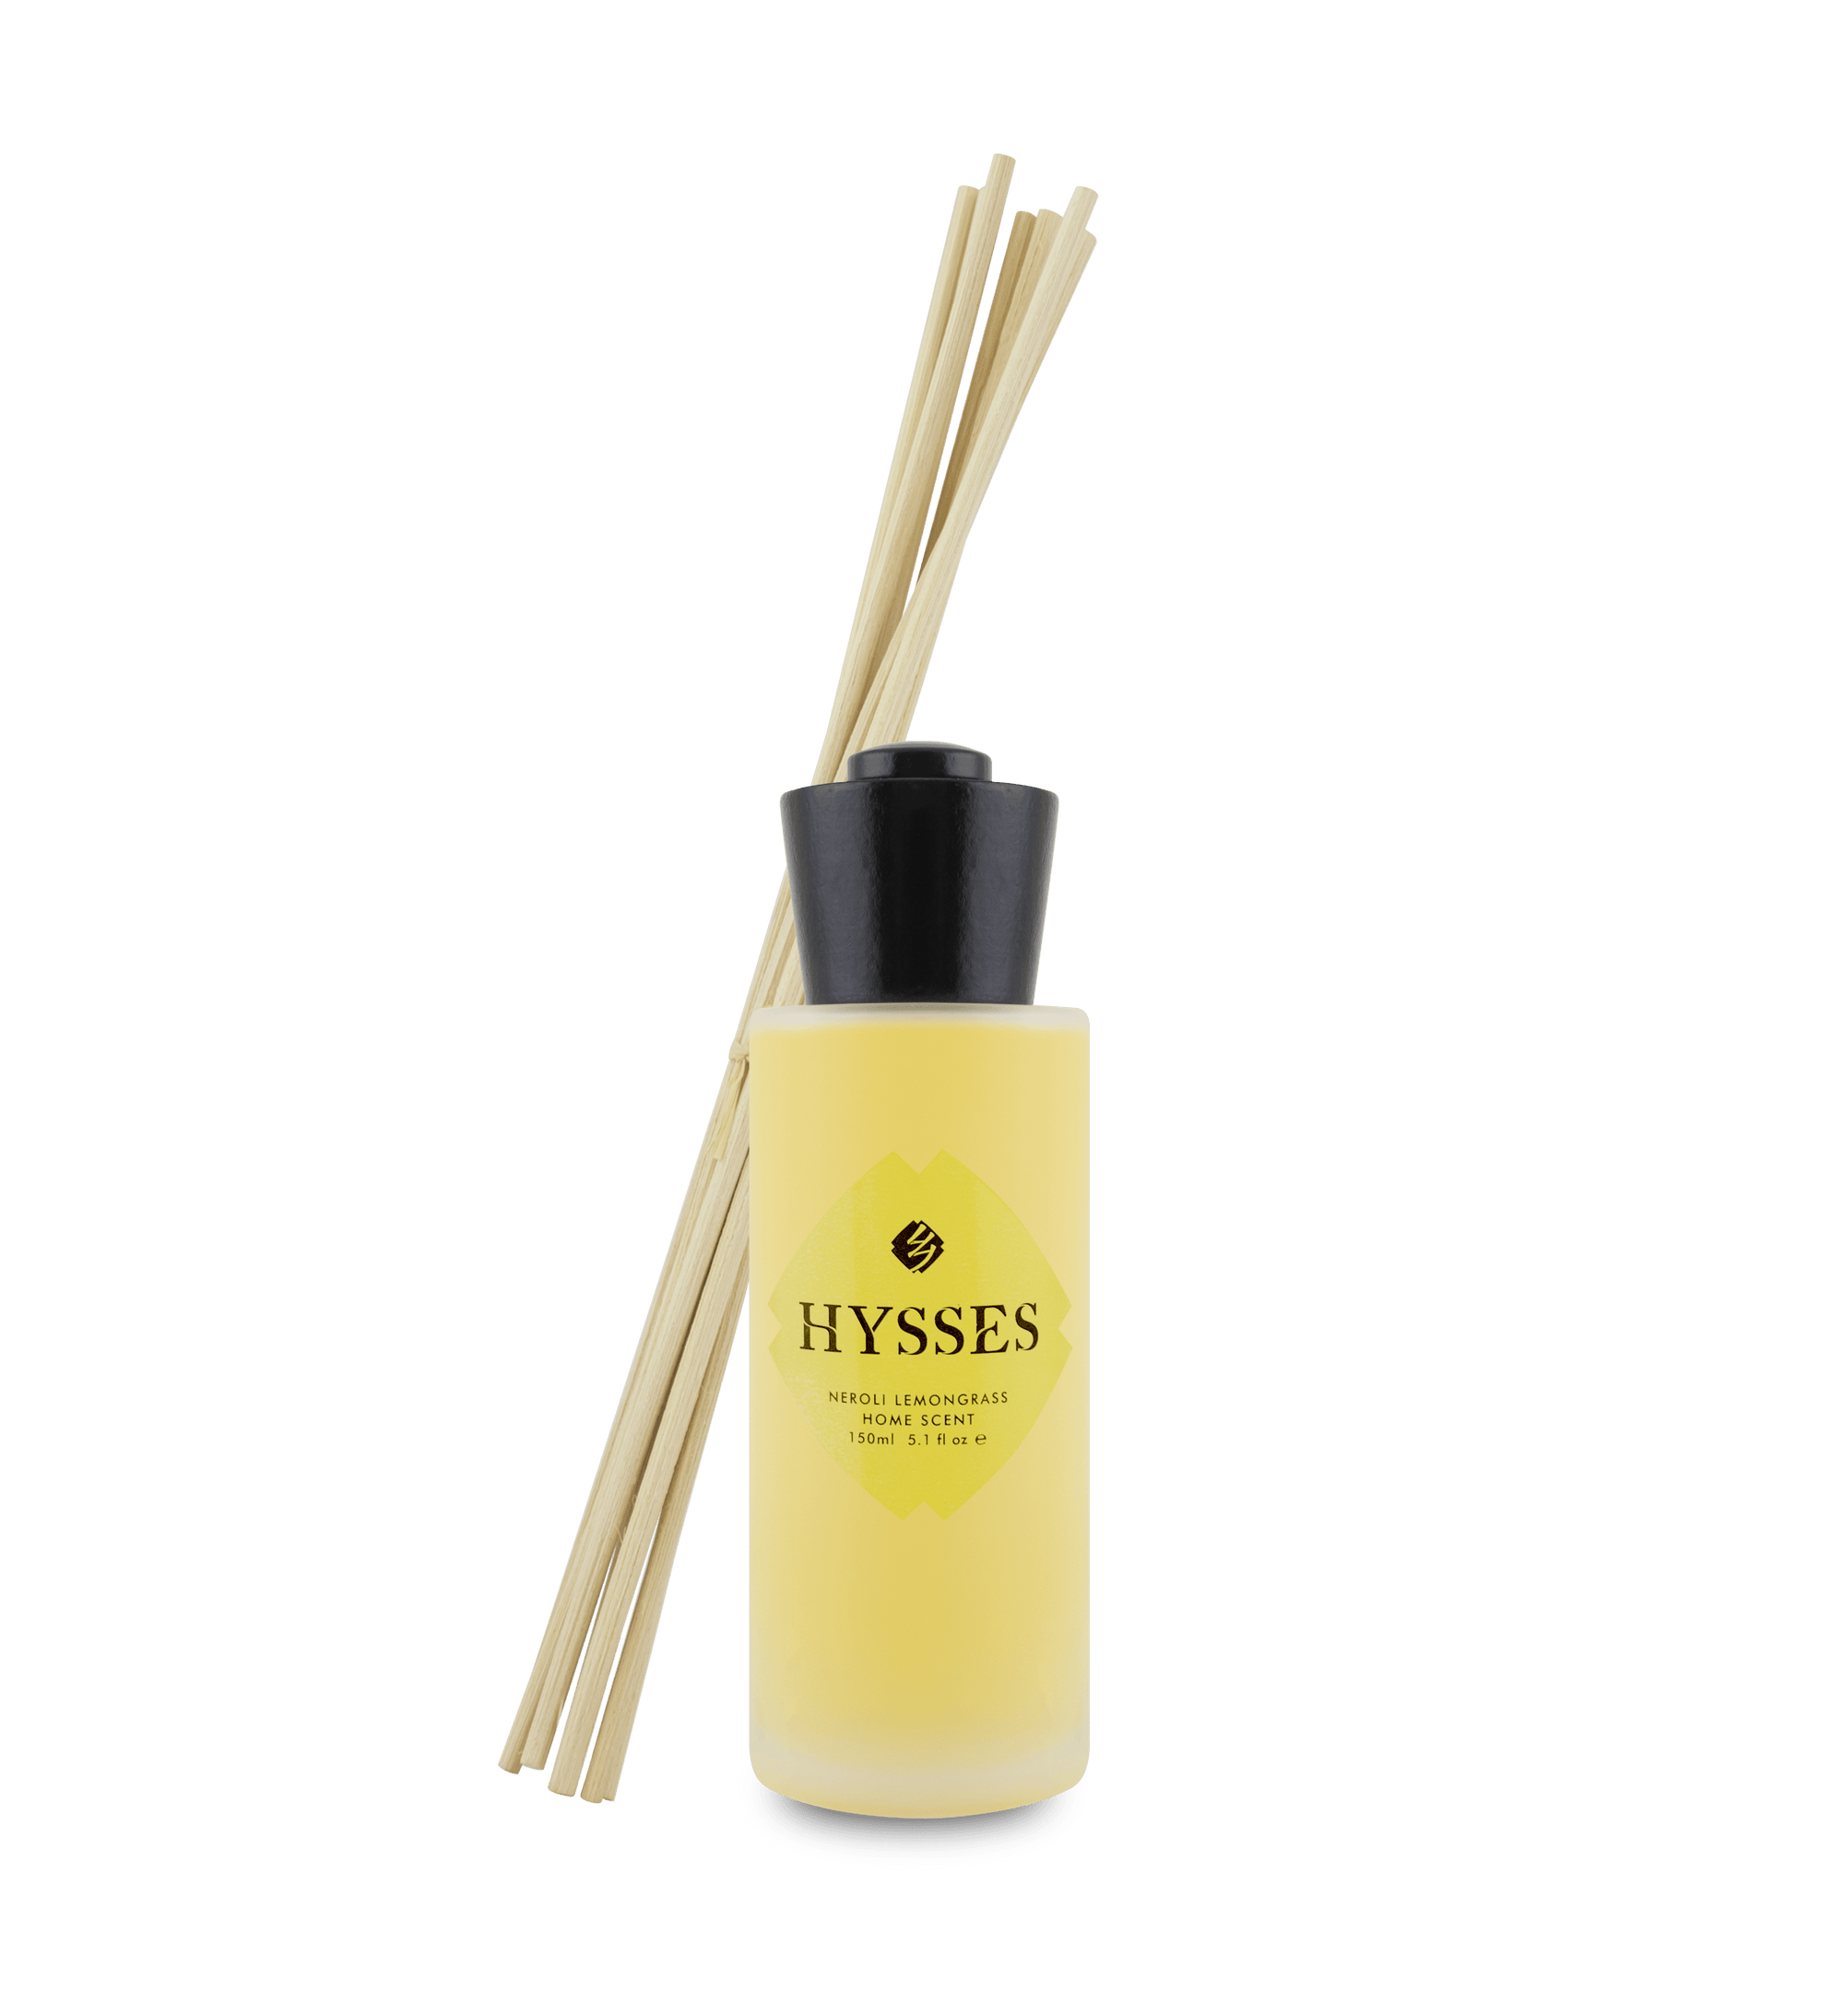 Hysses Home Scents 60ml Home Scent Reed Diffuser Neroli Lemongrass